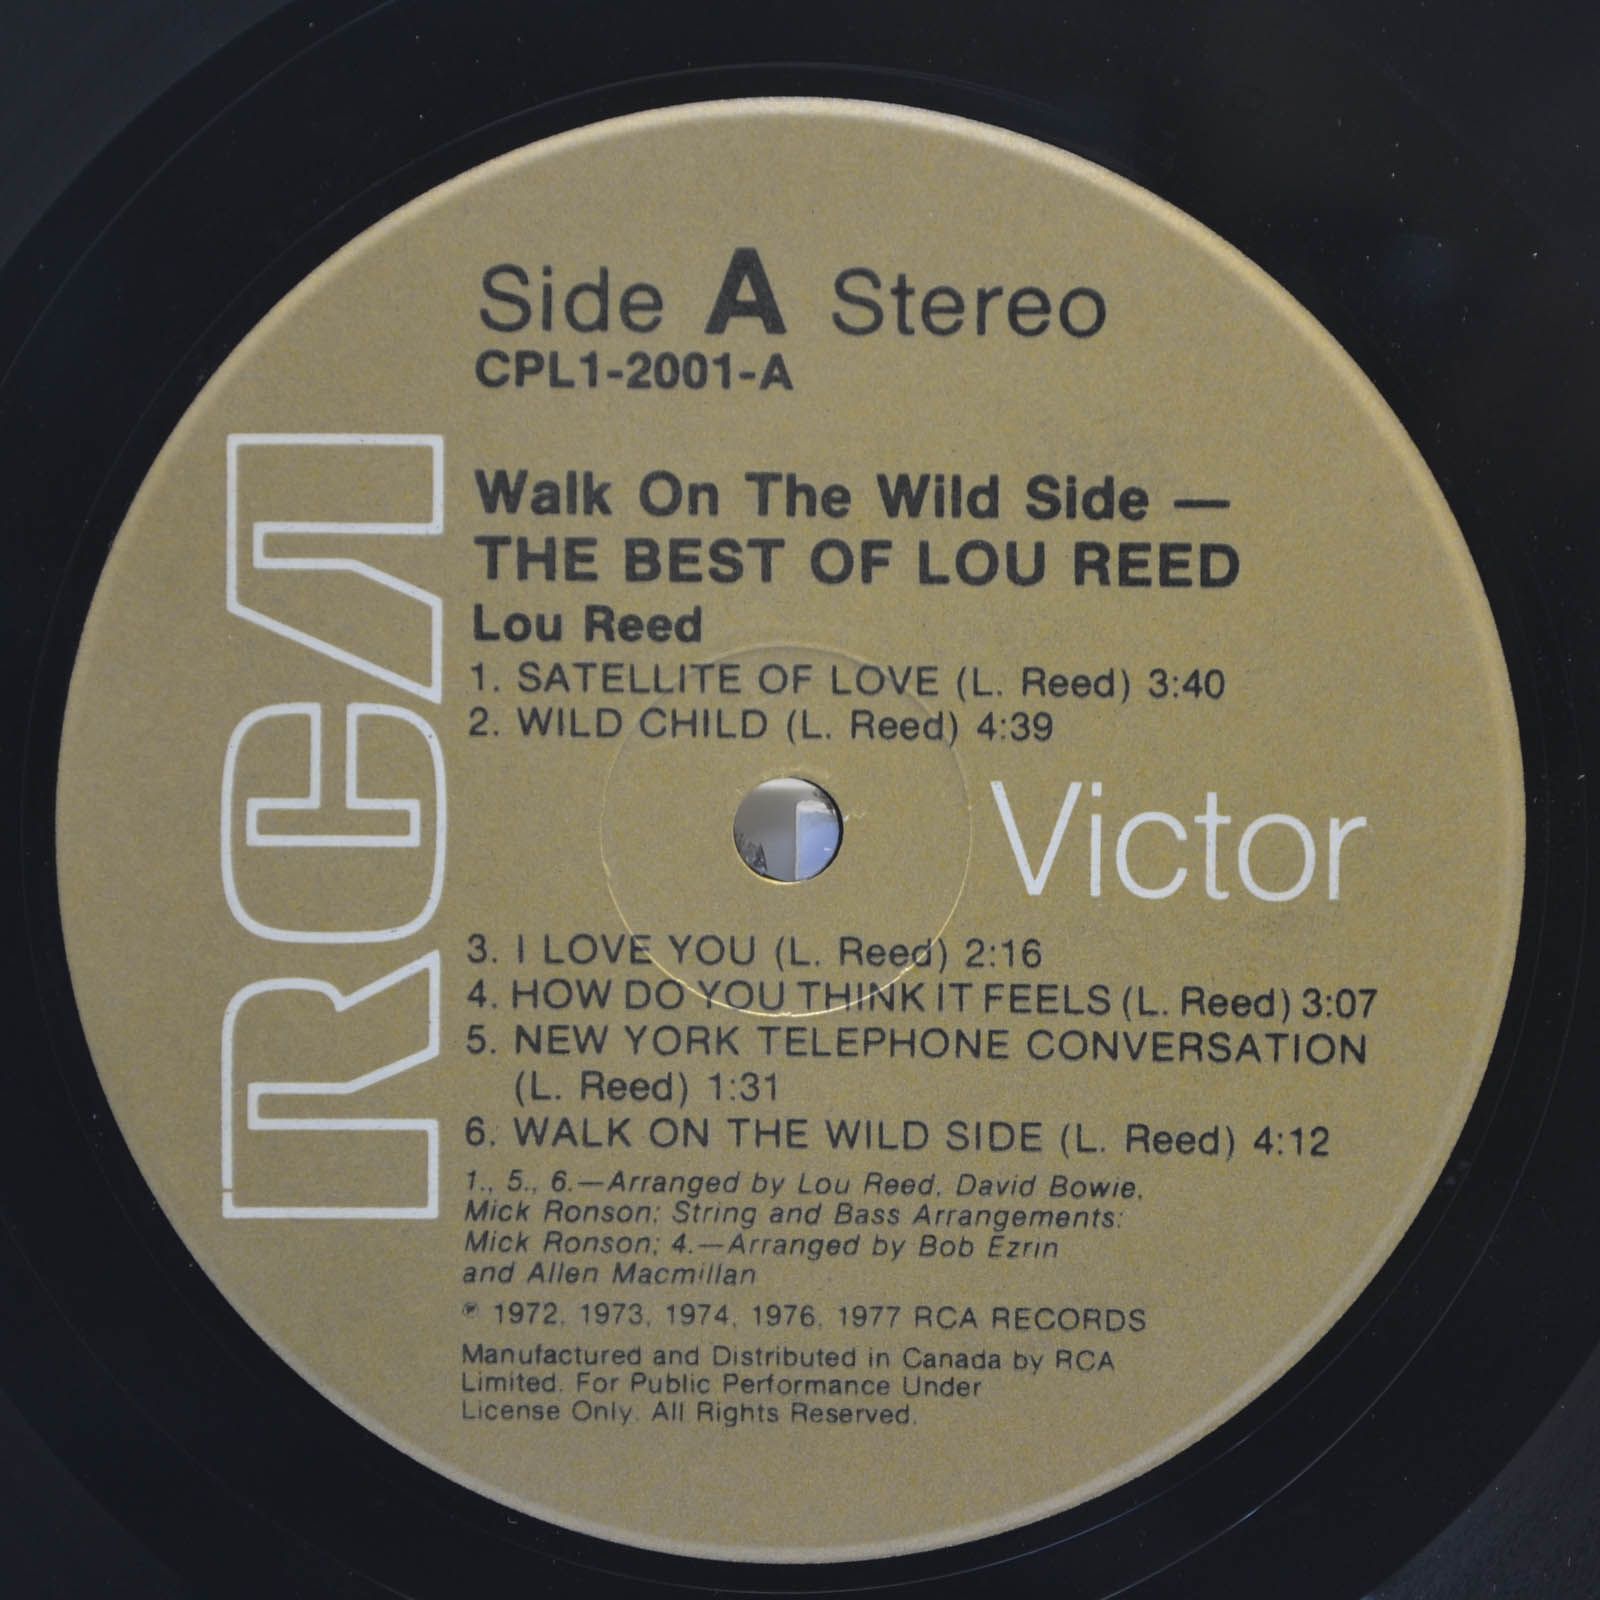 Lou Reed — Walk On The Wild Side - The Best Of Lou Reed, 1977